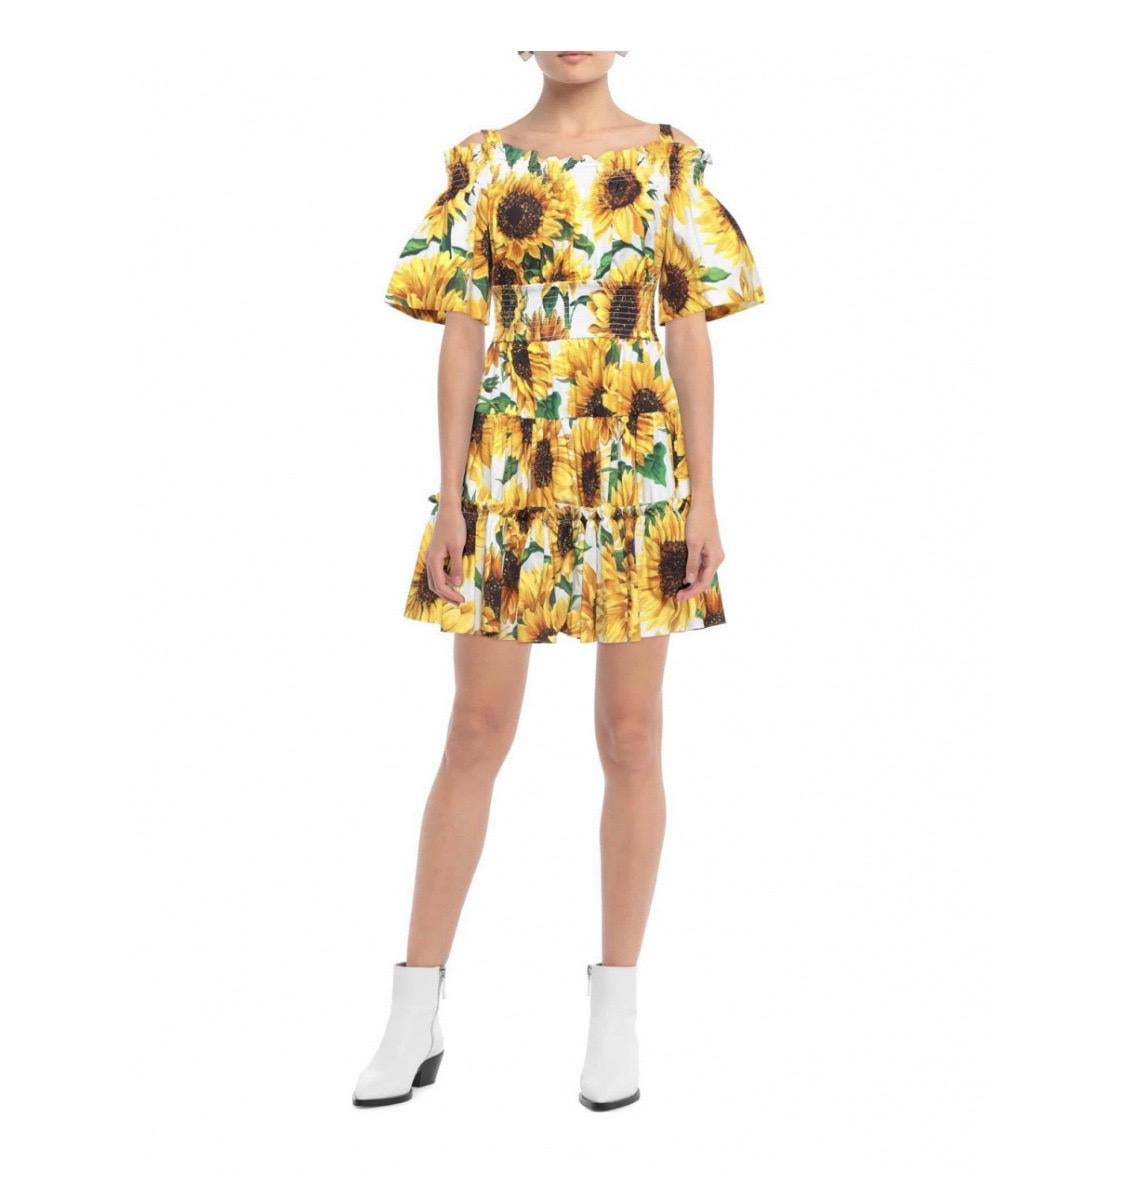 Dolce & Gabbana Sunflower Cotton

Poplin mid length dress

Size 46IT, Uk14, XL

100% cotton

Brand new with tags.

Please check my other DG clothing &

accessories! 